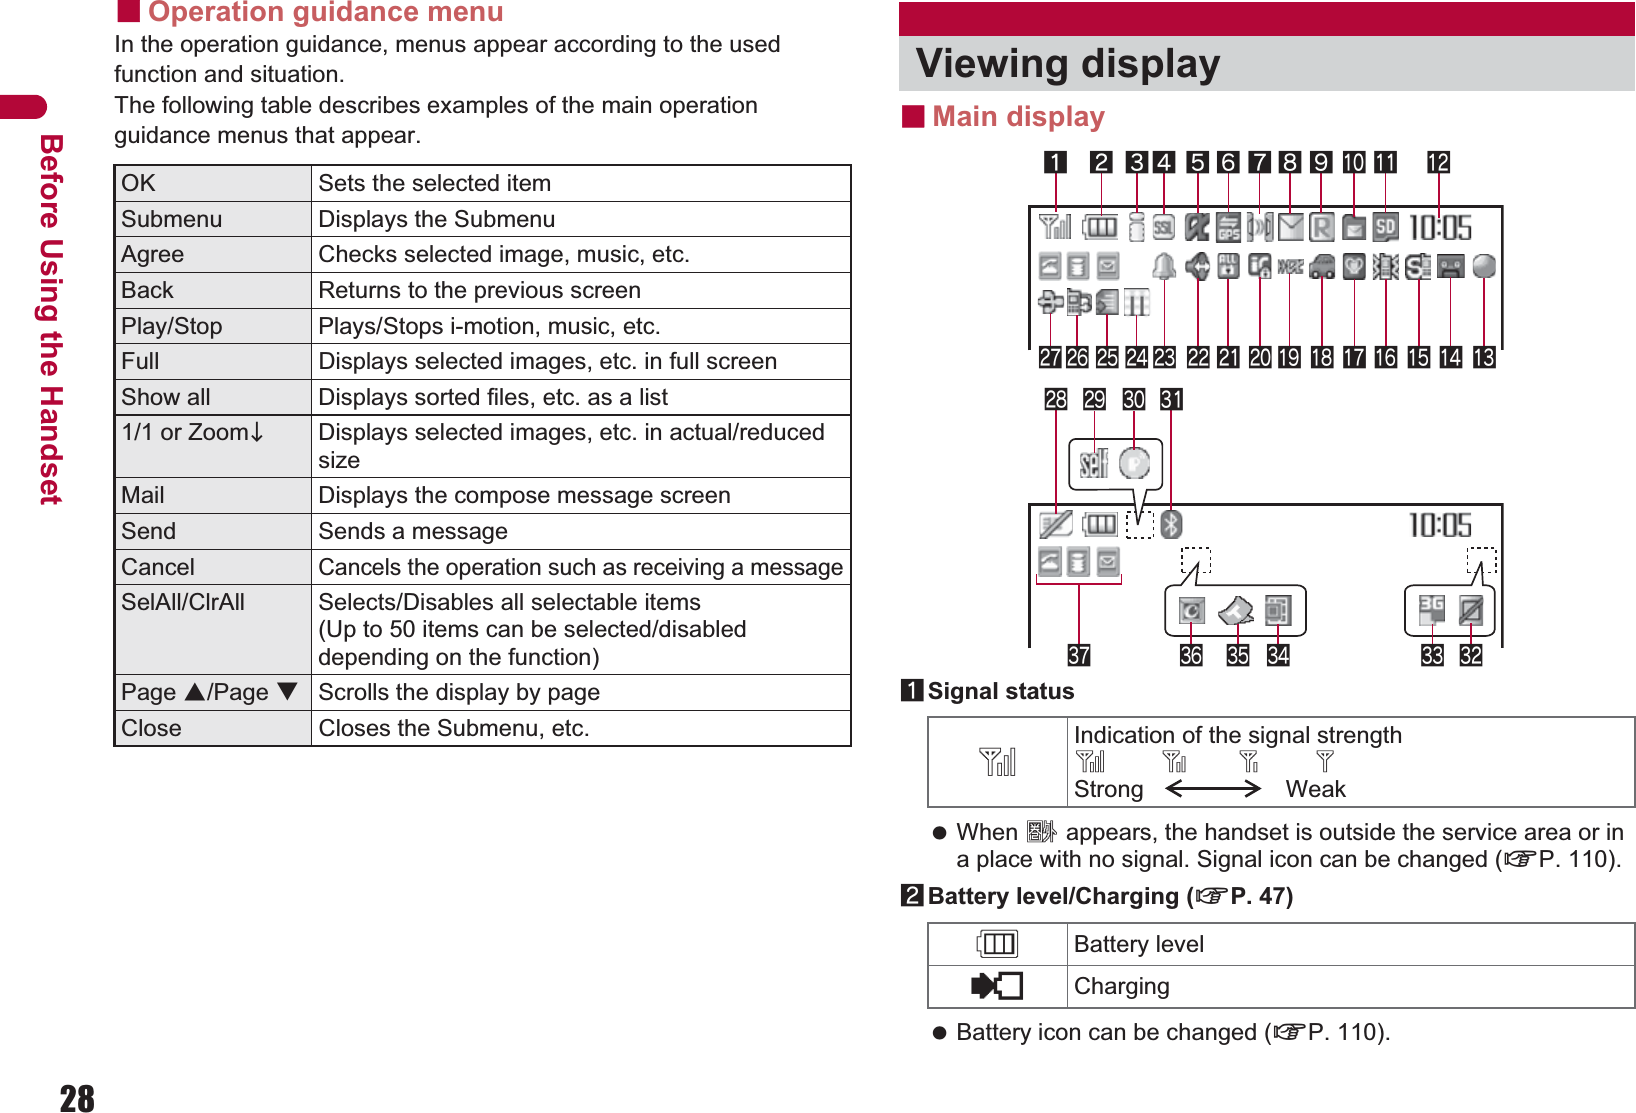 28Before Using the HandsetɡOperation guidance menuIn the operation guidance, menus appear according to the used function and situation.The following table describes examples of the main operation guidance menus that appear. ɡMain display1Signal status When A appears, the handset is outside the service area or in a place with no signal. Signal icon can be changed (nP. 110).2Battery level/Charging (nP. 47) Battery icon can be changed (nP. 110).OK Sets the selected itemSubmenu Displays the SubmenuAgree Checks selected image, music, etc.Back Returns to the previous screenPlay/Stop Plays/Stops i-motion, music, etc.Full Displays selected images, etc. in full screenShow all Displays sorted files, etc. as a list1/1 or ZoomeDisplays selected images, etc. in actual/reduced sizeMail Displays the compose message screenSend Sends a messageCancelCancels the operation such as receiving a messageSelAll/ClrAll Selects/Disables all selectable items(Up to 50 items can be selected/disabled depending on the function)Page ɣ/Page ɥScrolls the display by pageClose Closes the Submenu, etc.Viewing display]Indication of the signal strength]no pStrong Weak&quot;Battery level{Charging12345 7pmlkjihgnuv&gt;b cq or f e ds&lt;z wxt6 a8 9y